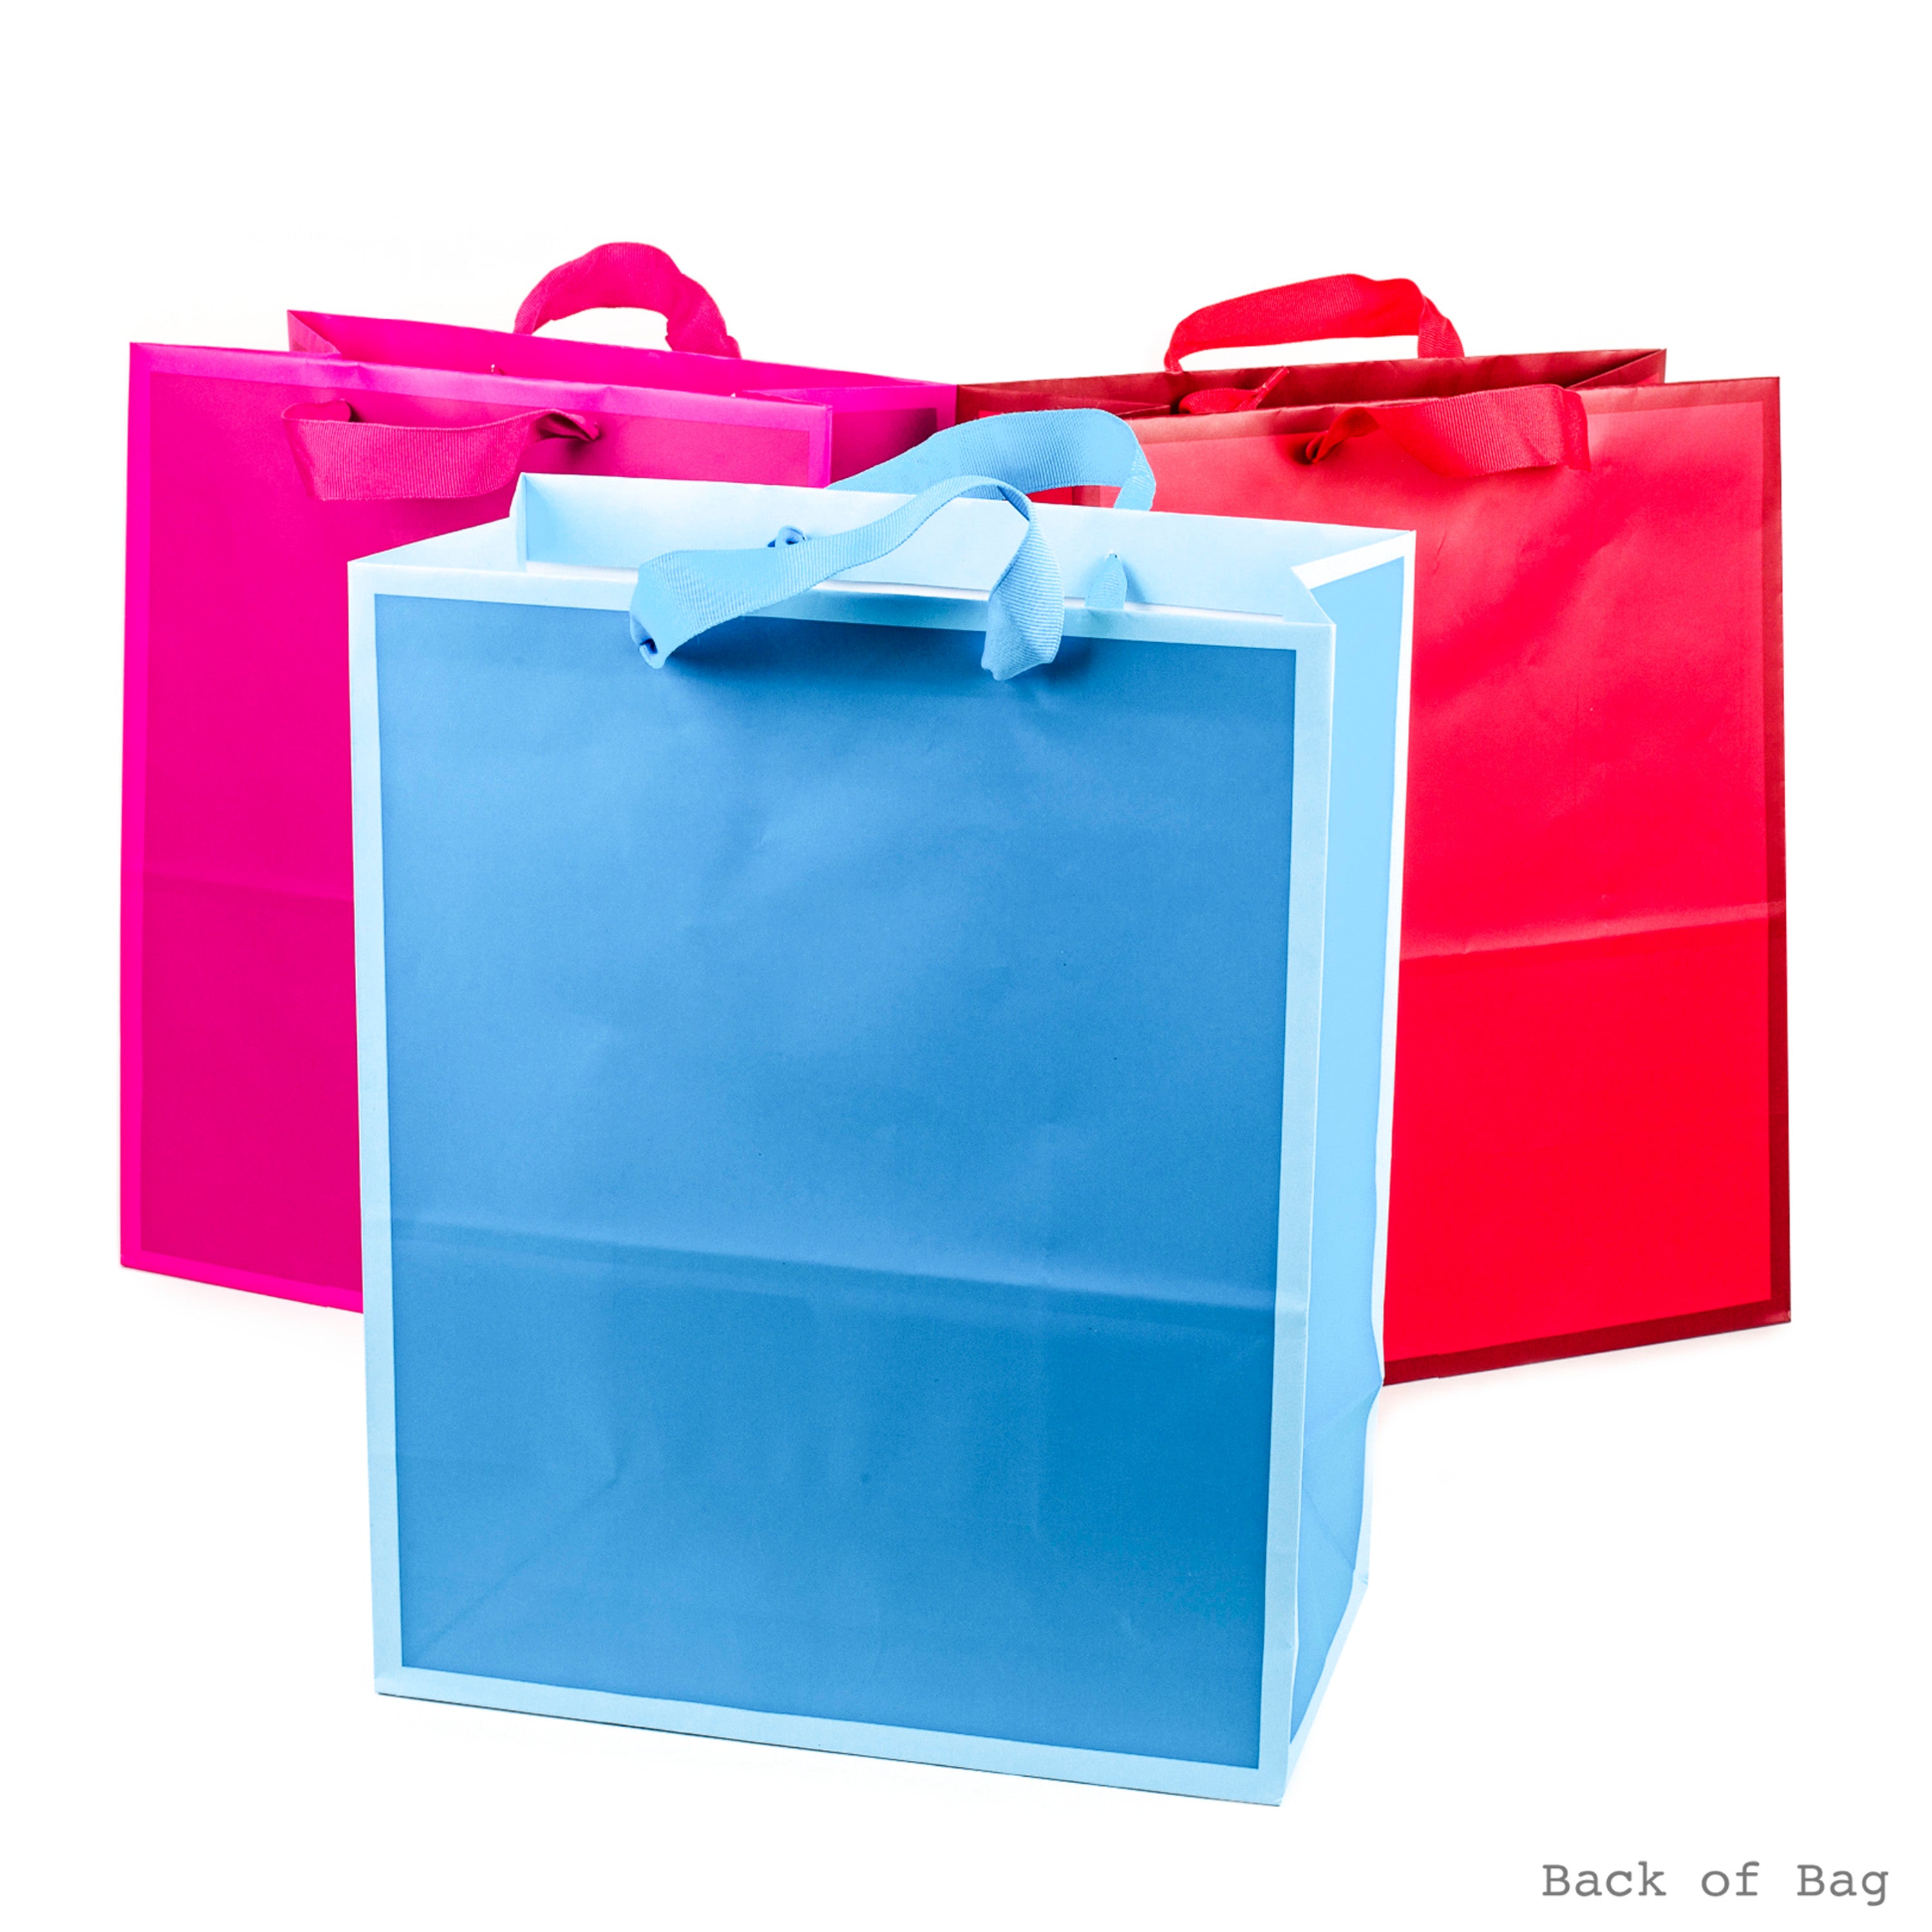 13" Large Solid Color Gift Bags - Pack of 3 (Red, Blue, Hot Pink) for Birthdays, Baby Showers, Holidays and More 